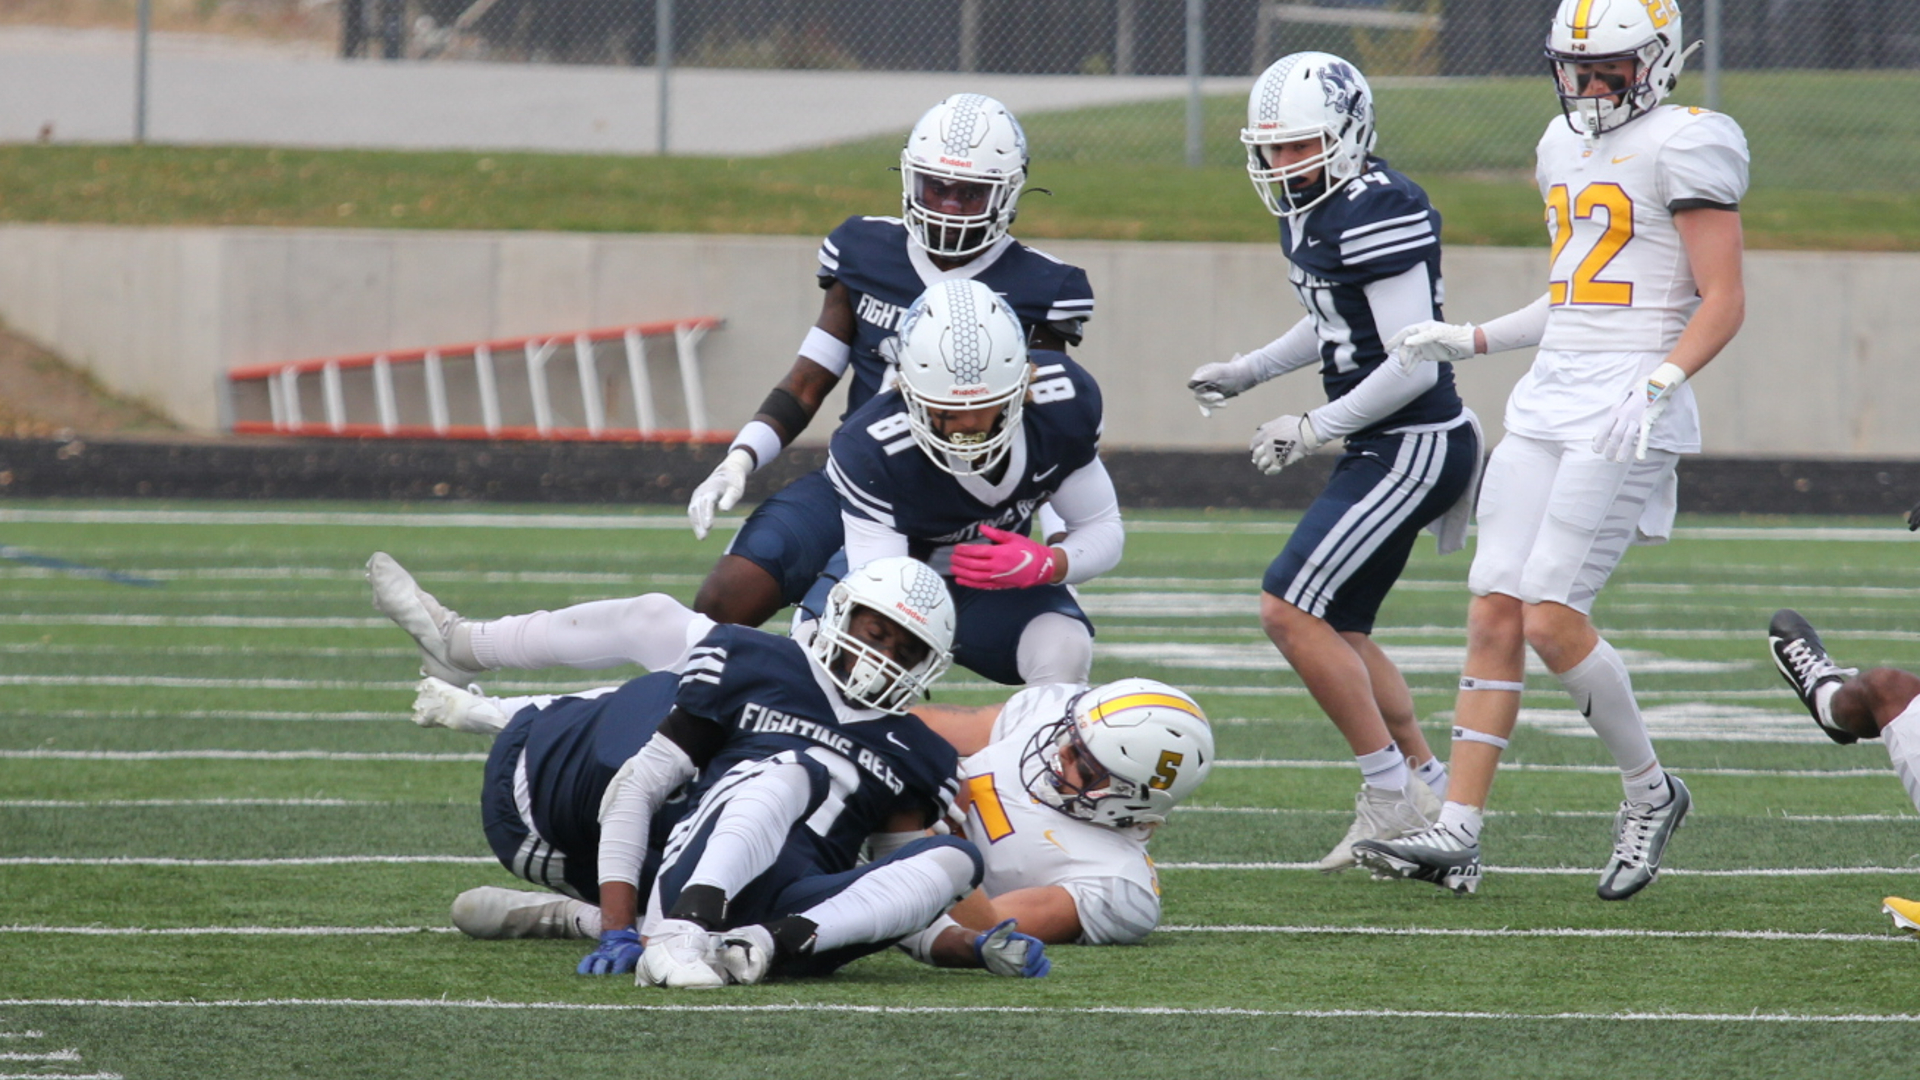 St. Ambrose drops second straight with loss at St. Francis